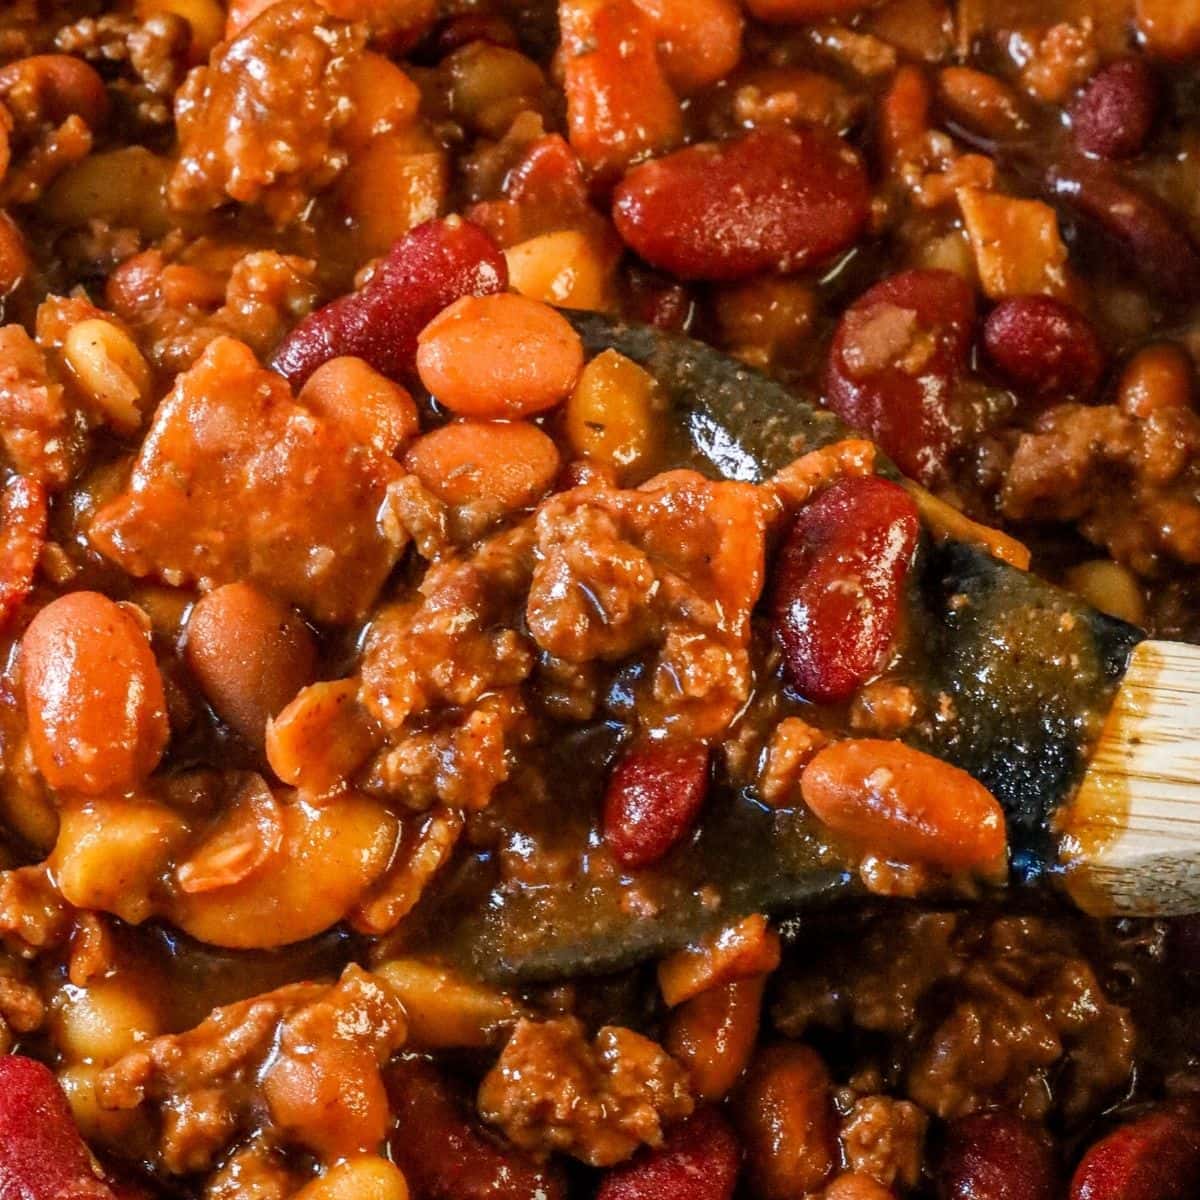 https://sweetcsdesigns.com/wp-content/uploads/2021/01/BBQ-Baked-Beans-Recipe-Picture-1.jpg